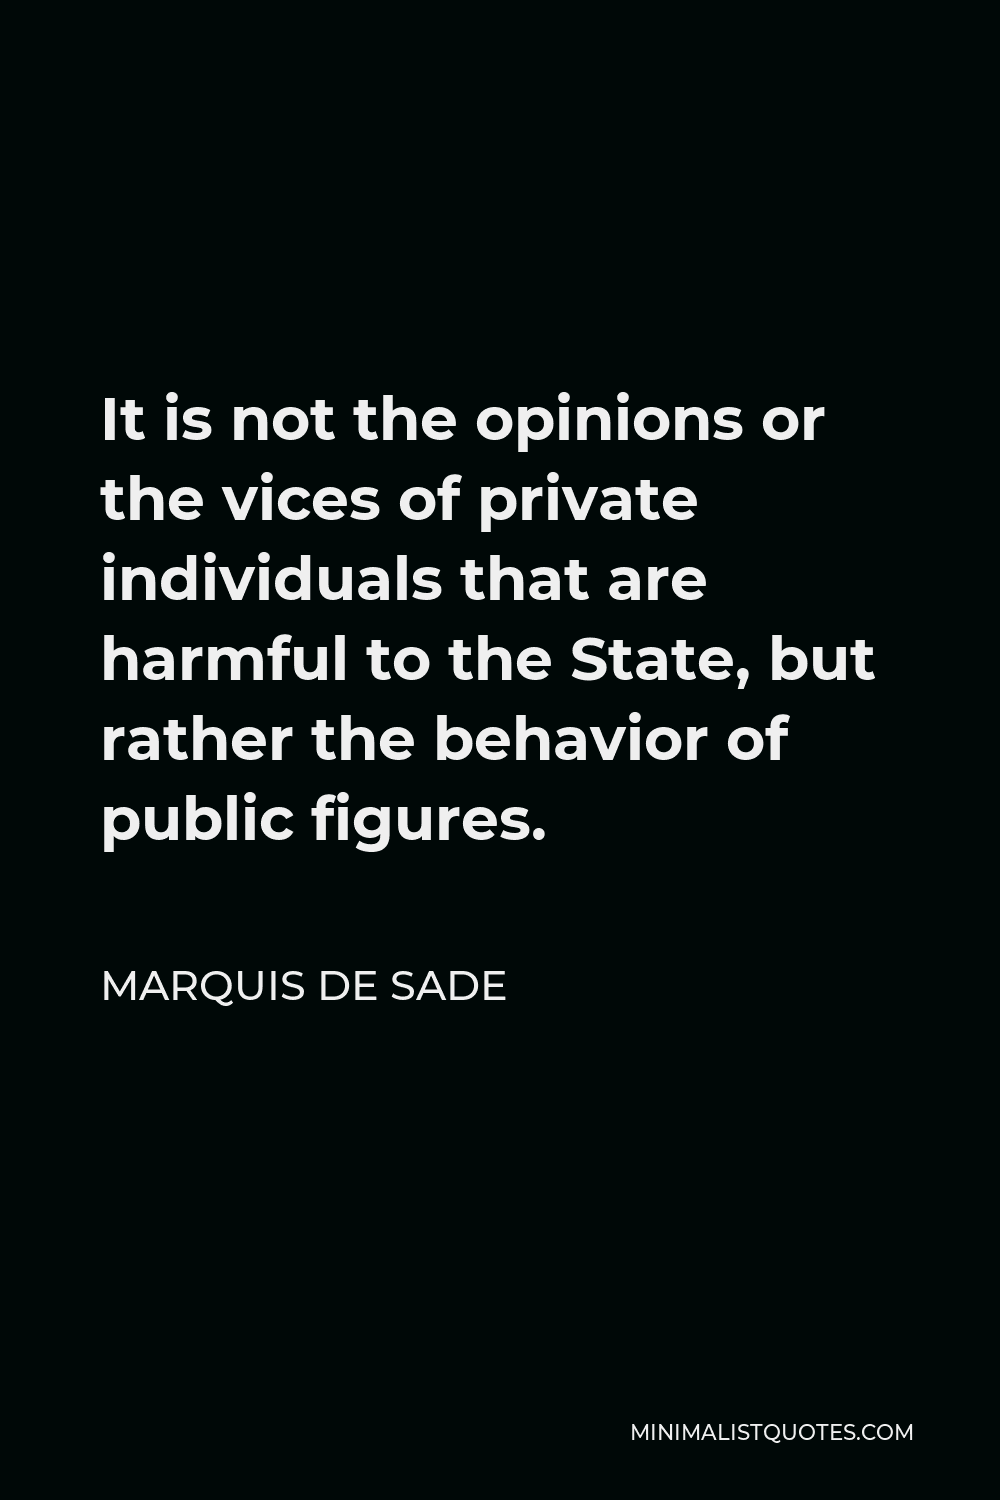 Marquis de Sade Quote - It is not the opinions or the vices of private individuals that are harmful to the State, but rather the behavior of public figures.